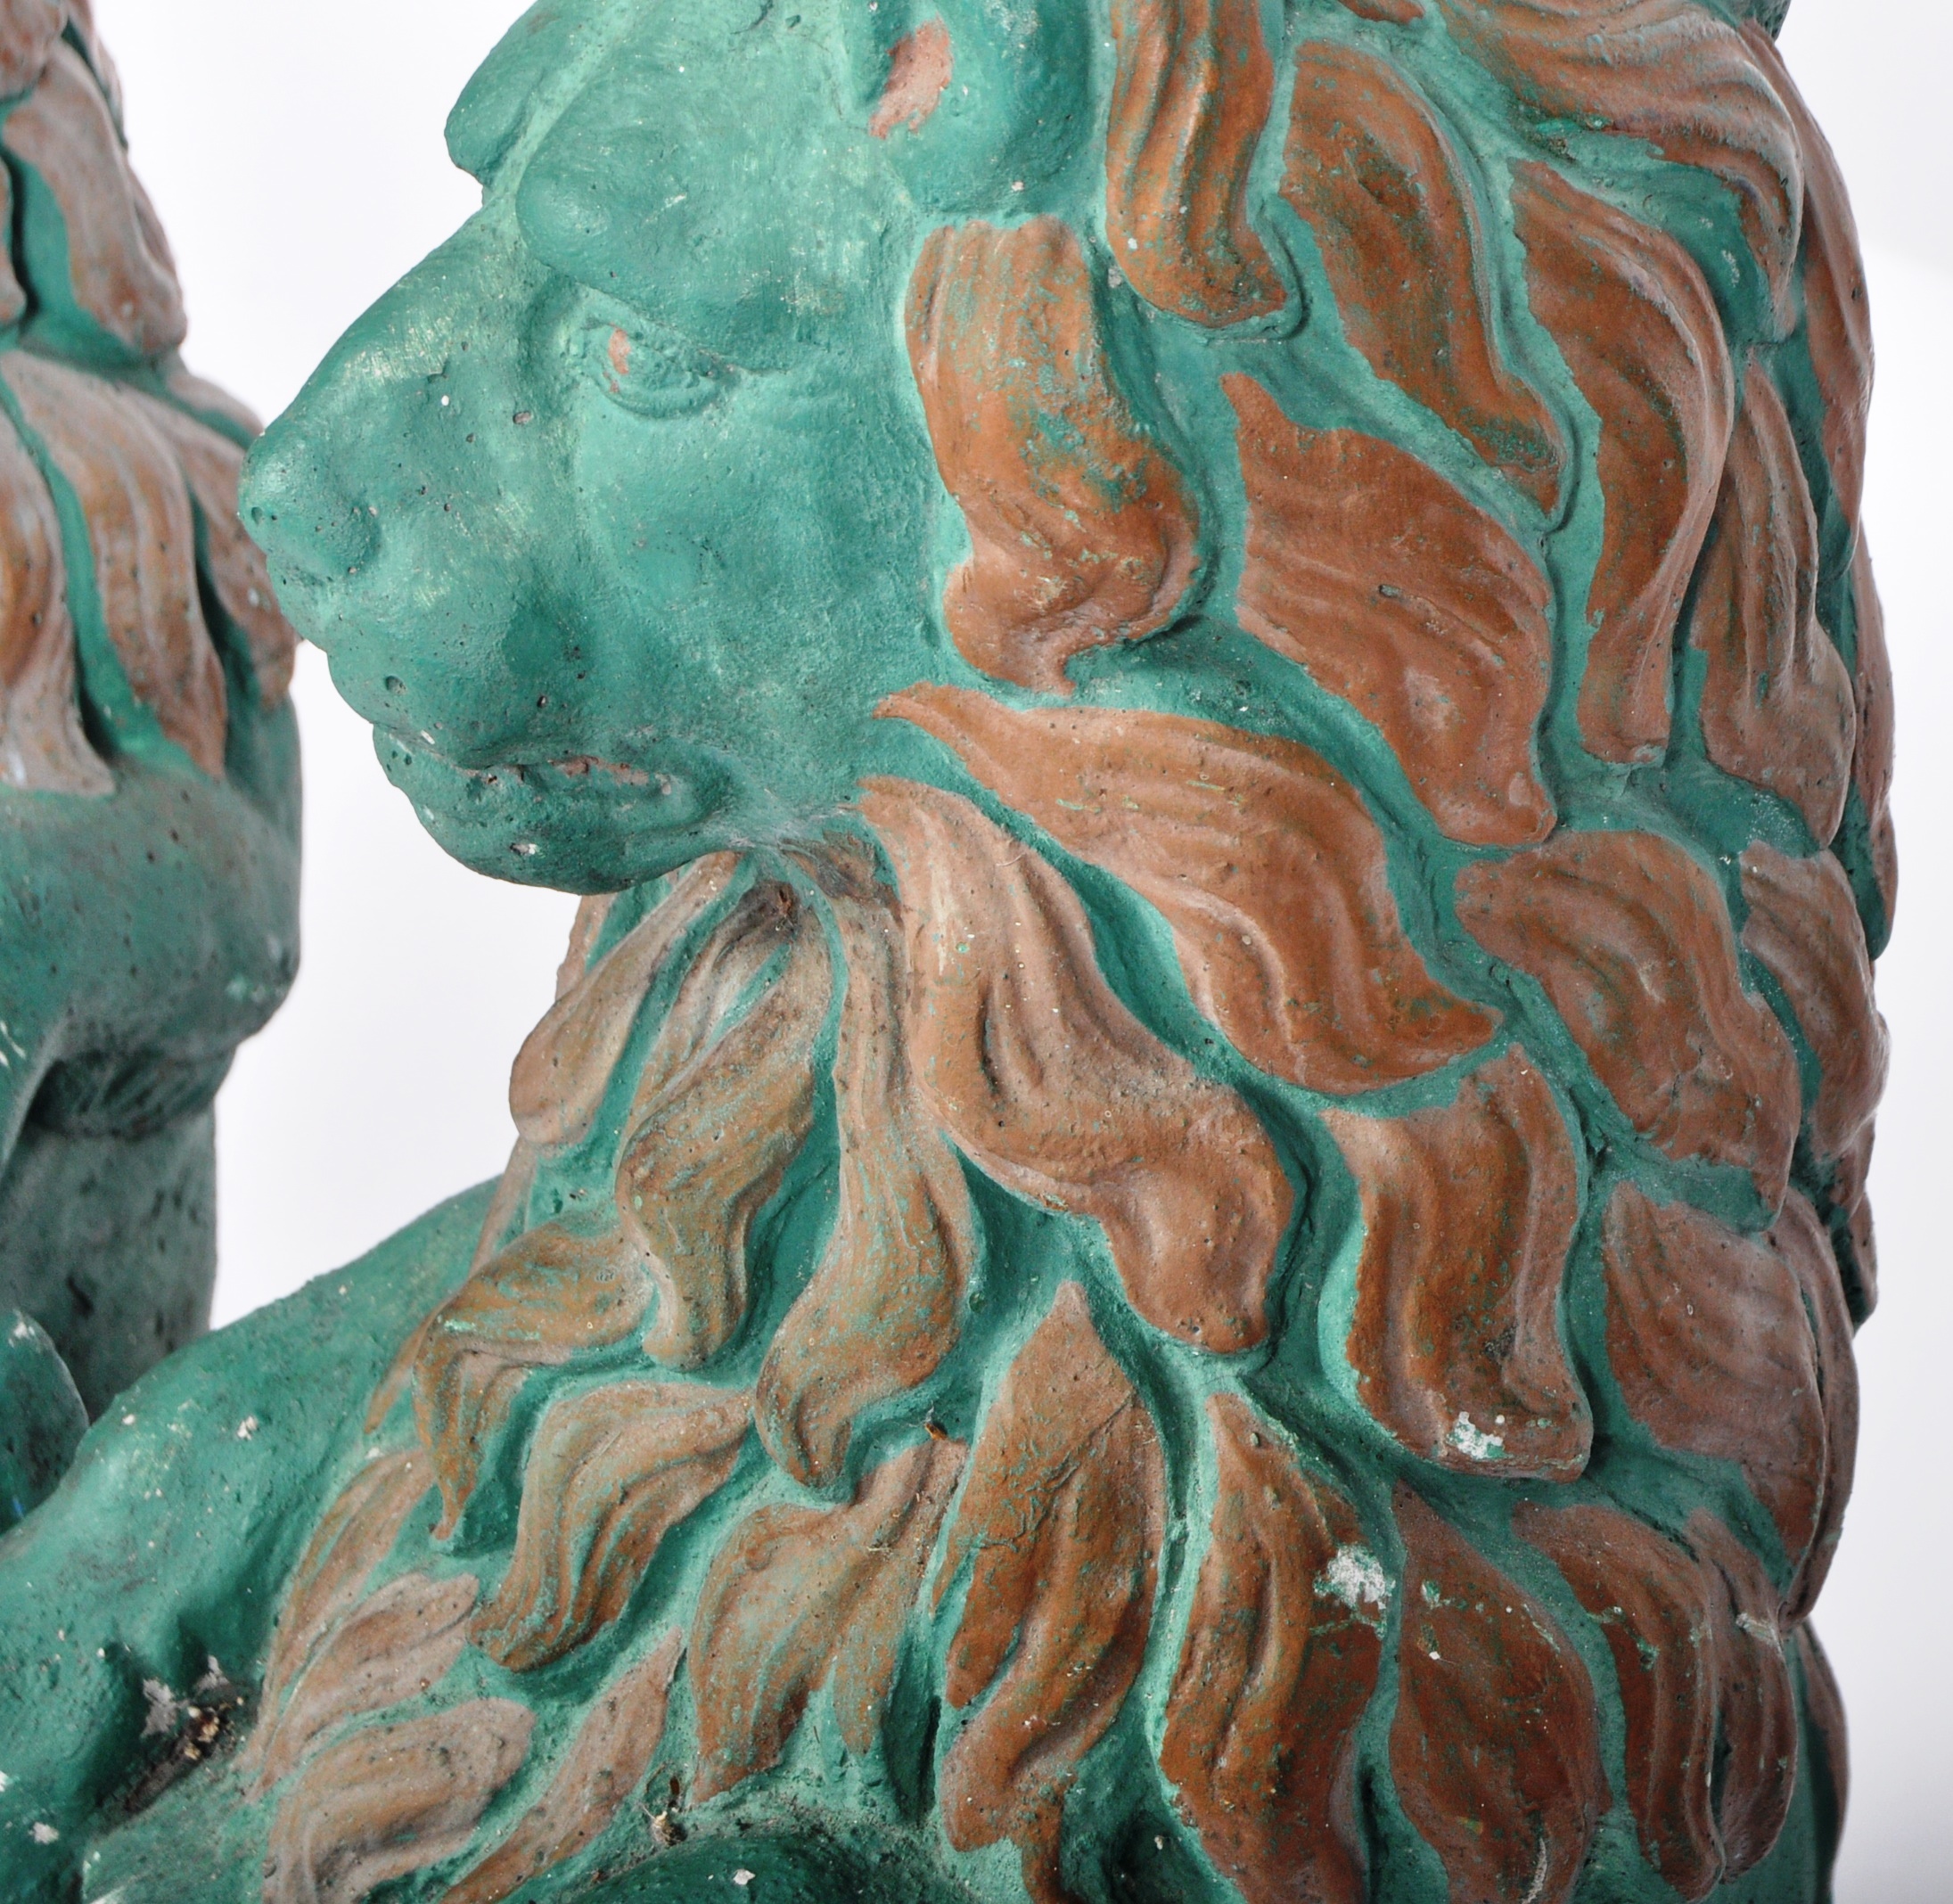 MATCHING PAIR OF PAINTED RECONSTITUTED STONE LION FIGURES - Image 10 of 12